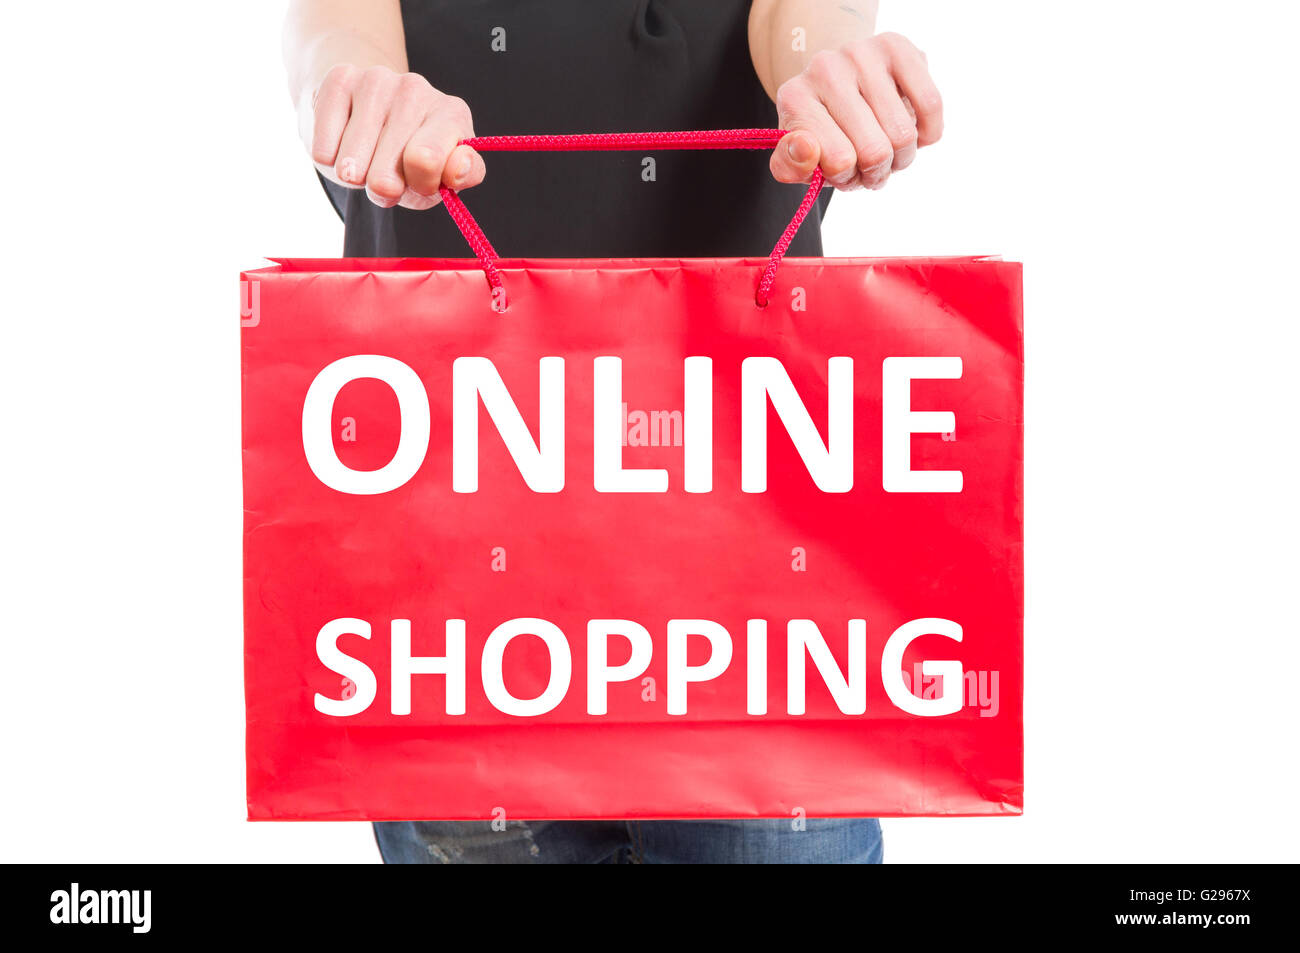 Online shopping concept with a woman holding a red paper gift bag Stock Photo